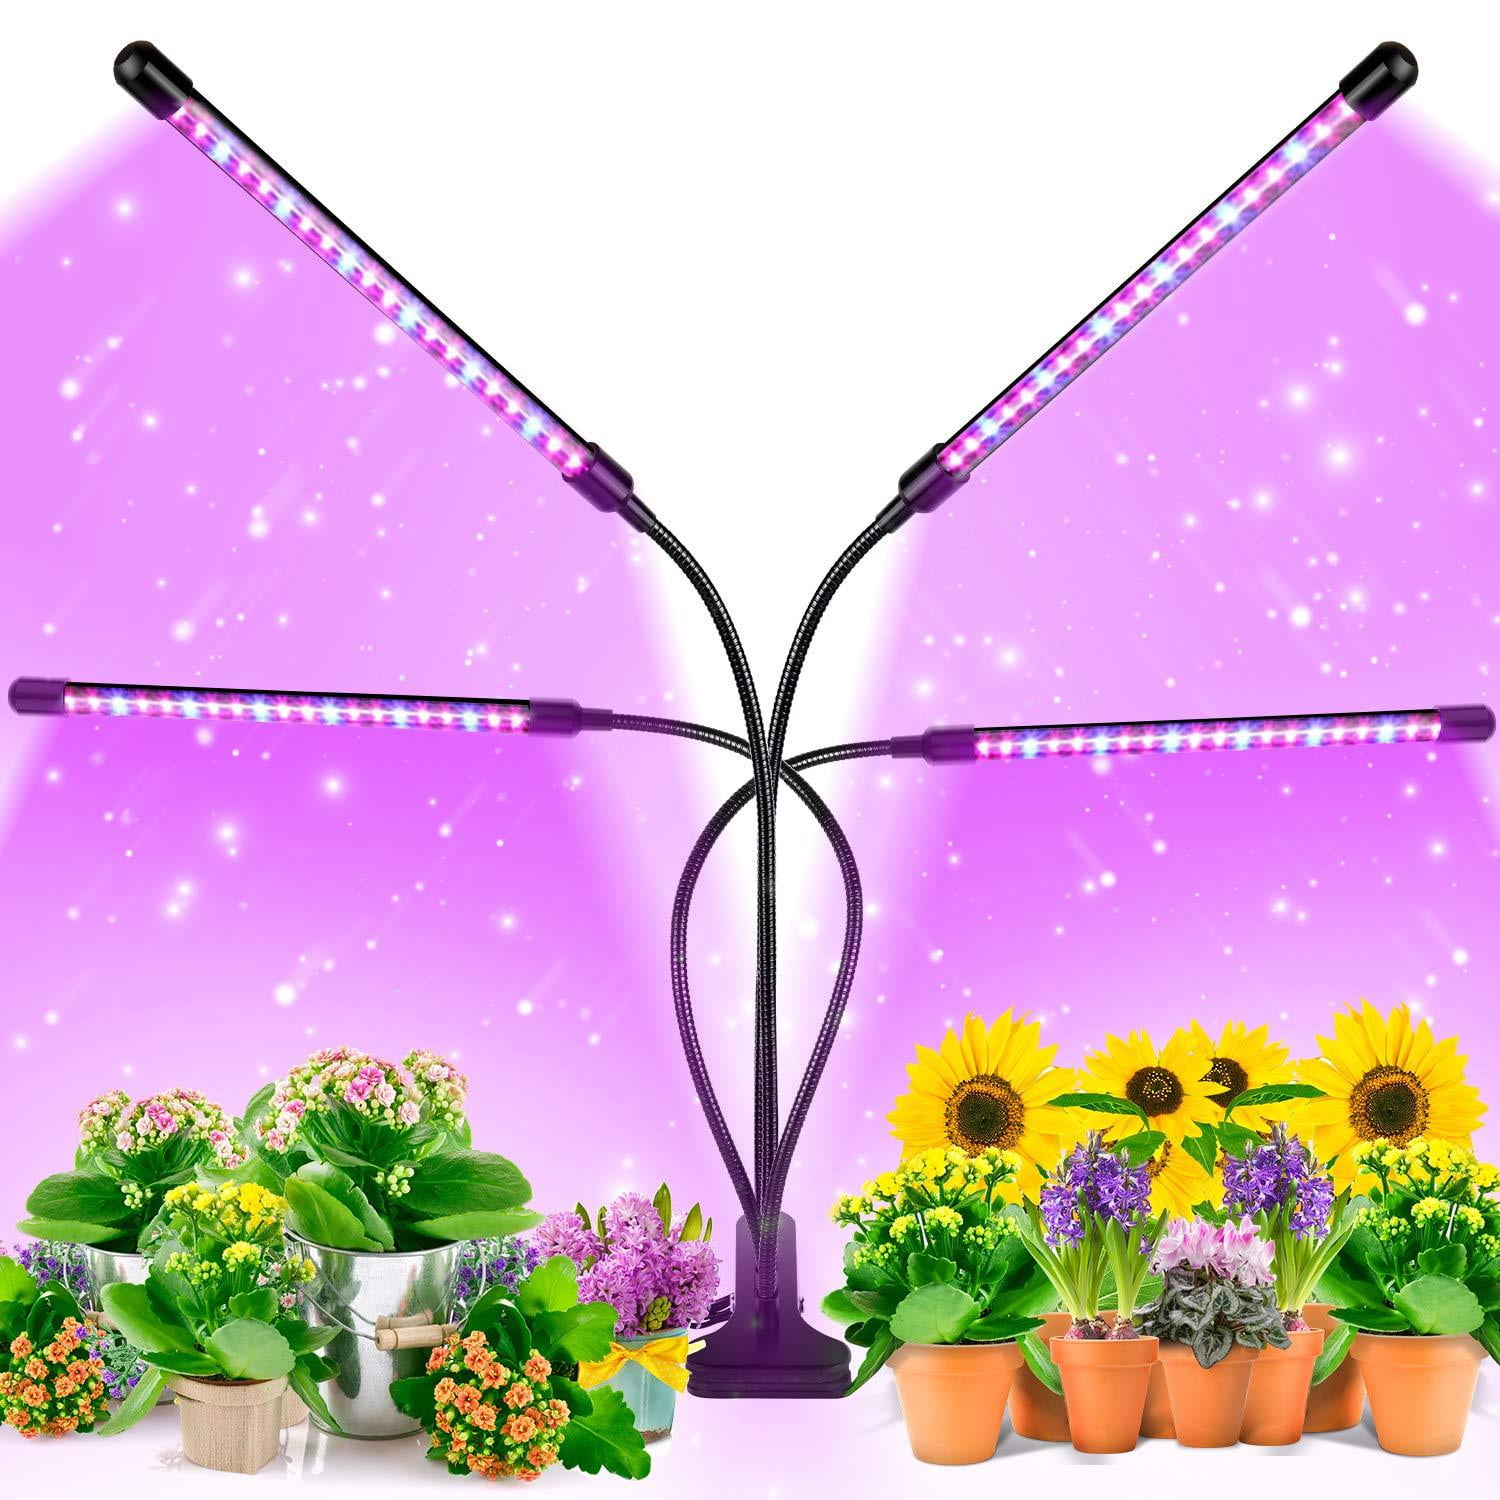 Full Spectrum Plant Grow Light with AUTO Cycle ON/Off Timer Two Head 3 Lighting Modes 40 LED Lamp 9 Dimmable Levels for Indoor Plants Fansteck Grow Light Plant Light 